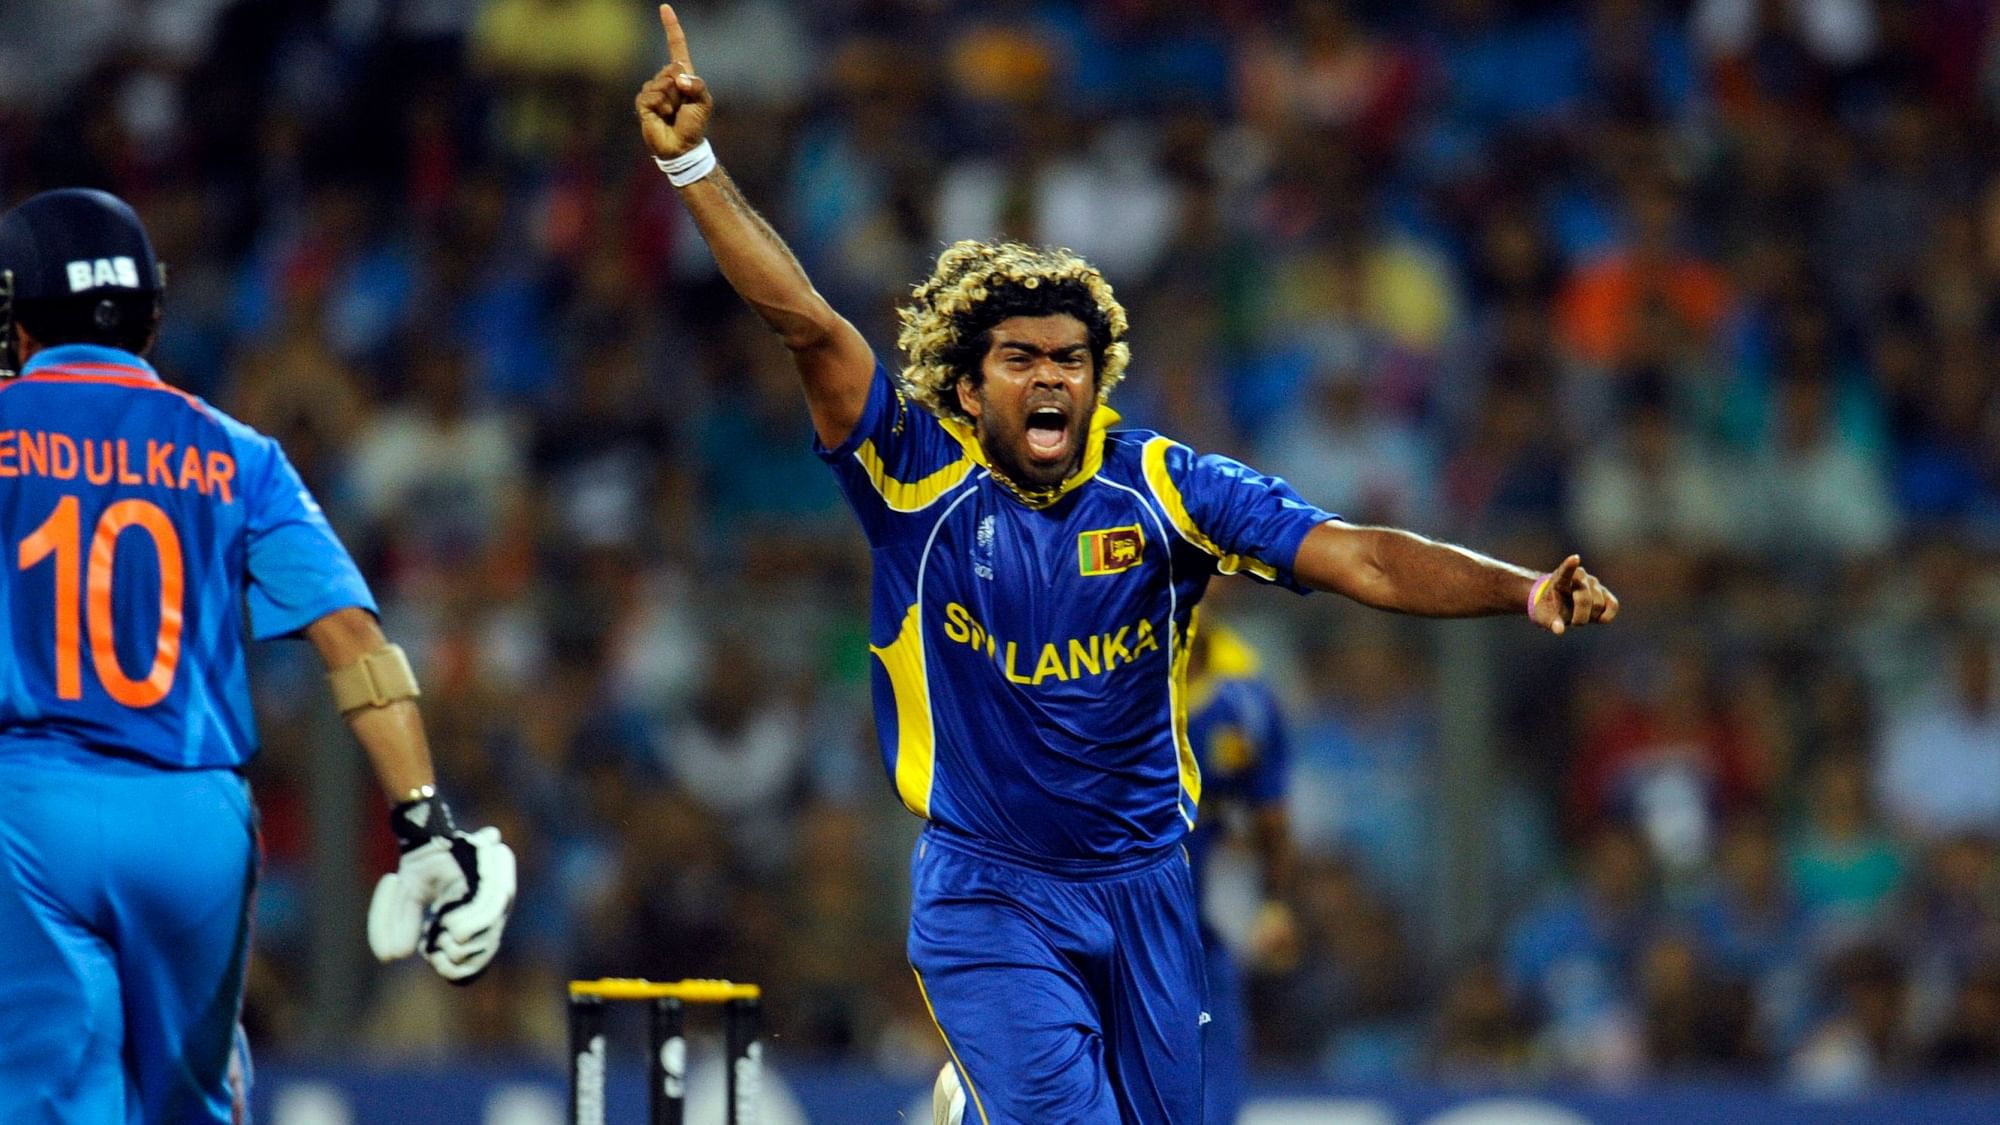 Sri Lanka Cricket on Thursday, 18 April, announced their 15-member squad for the ICC Cricket World Cup. Lasith Malinga (above) did make the cut.